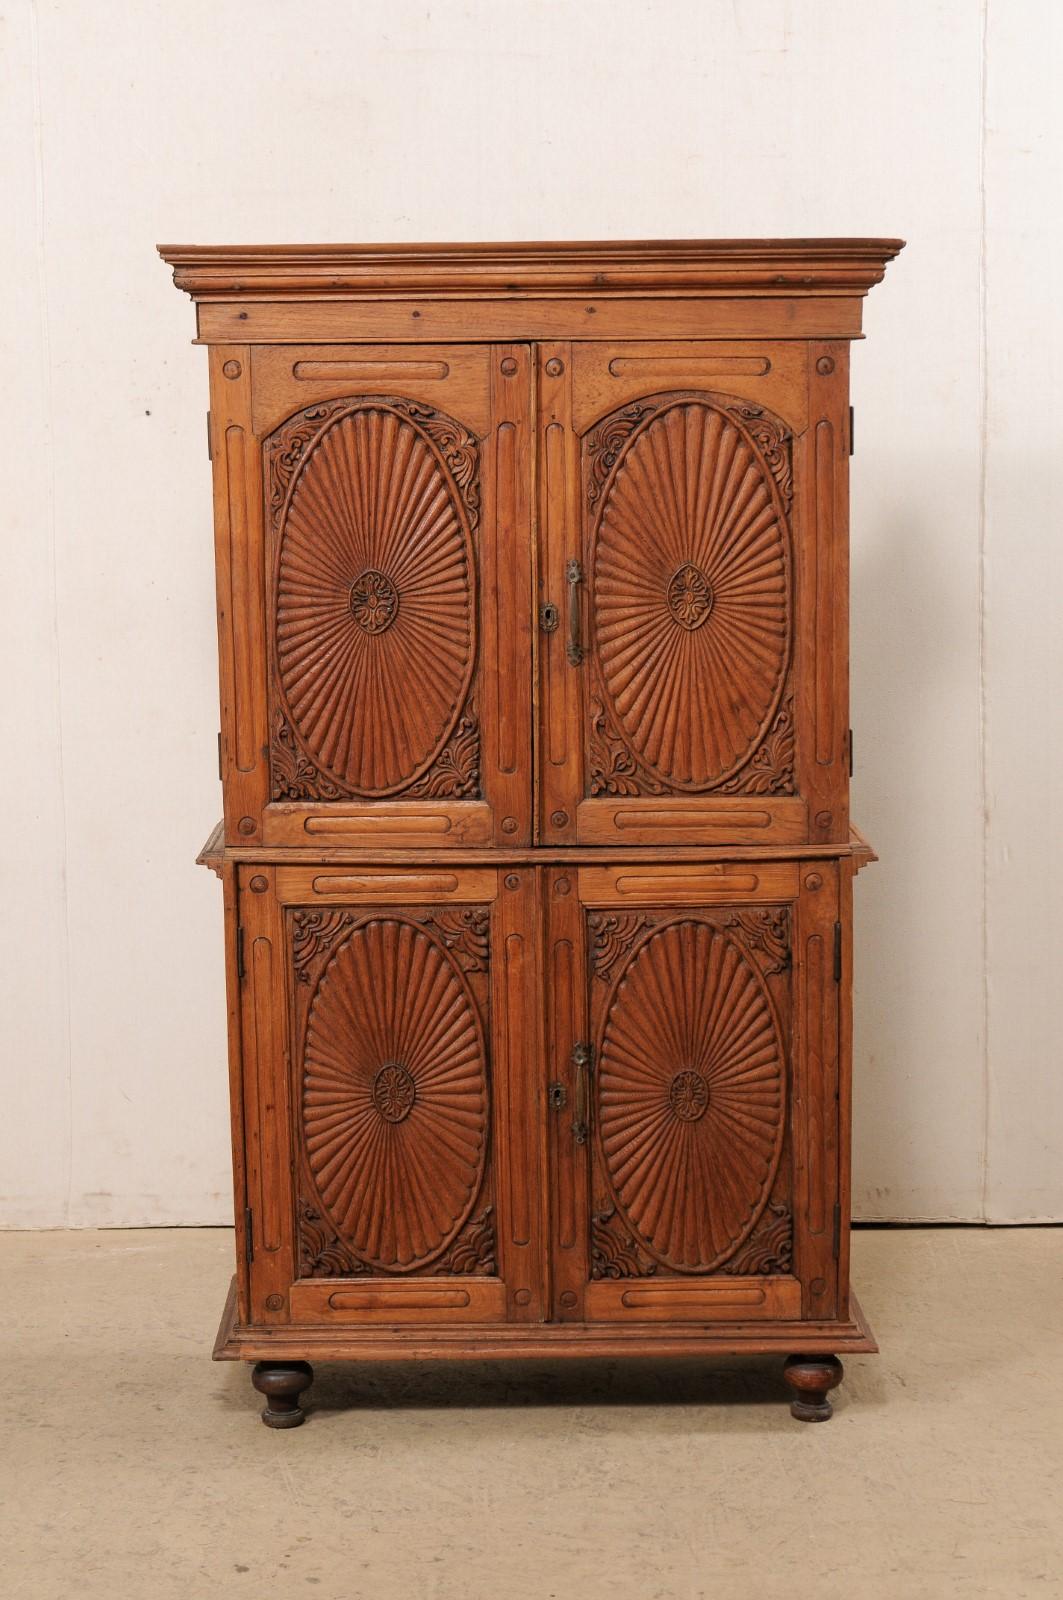 Tall British Colonial Teak-Carved Cabinet W/ Beautifully Carved Doors, 19th C 4